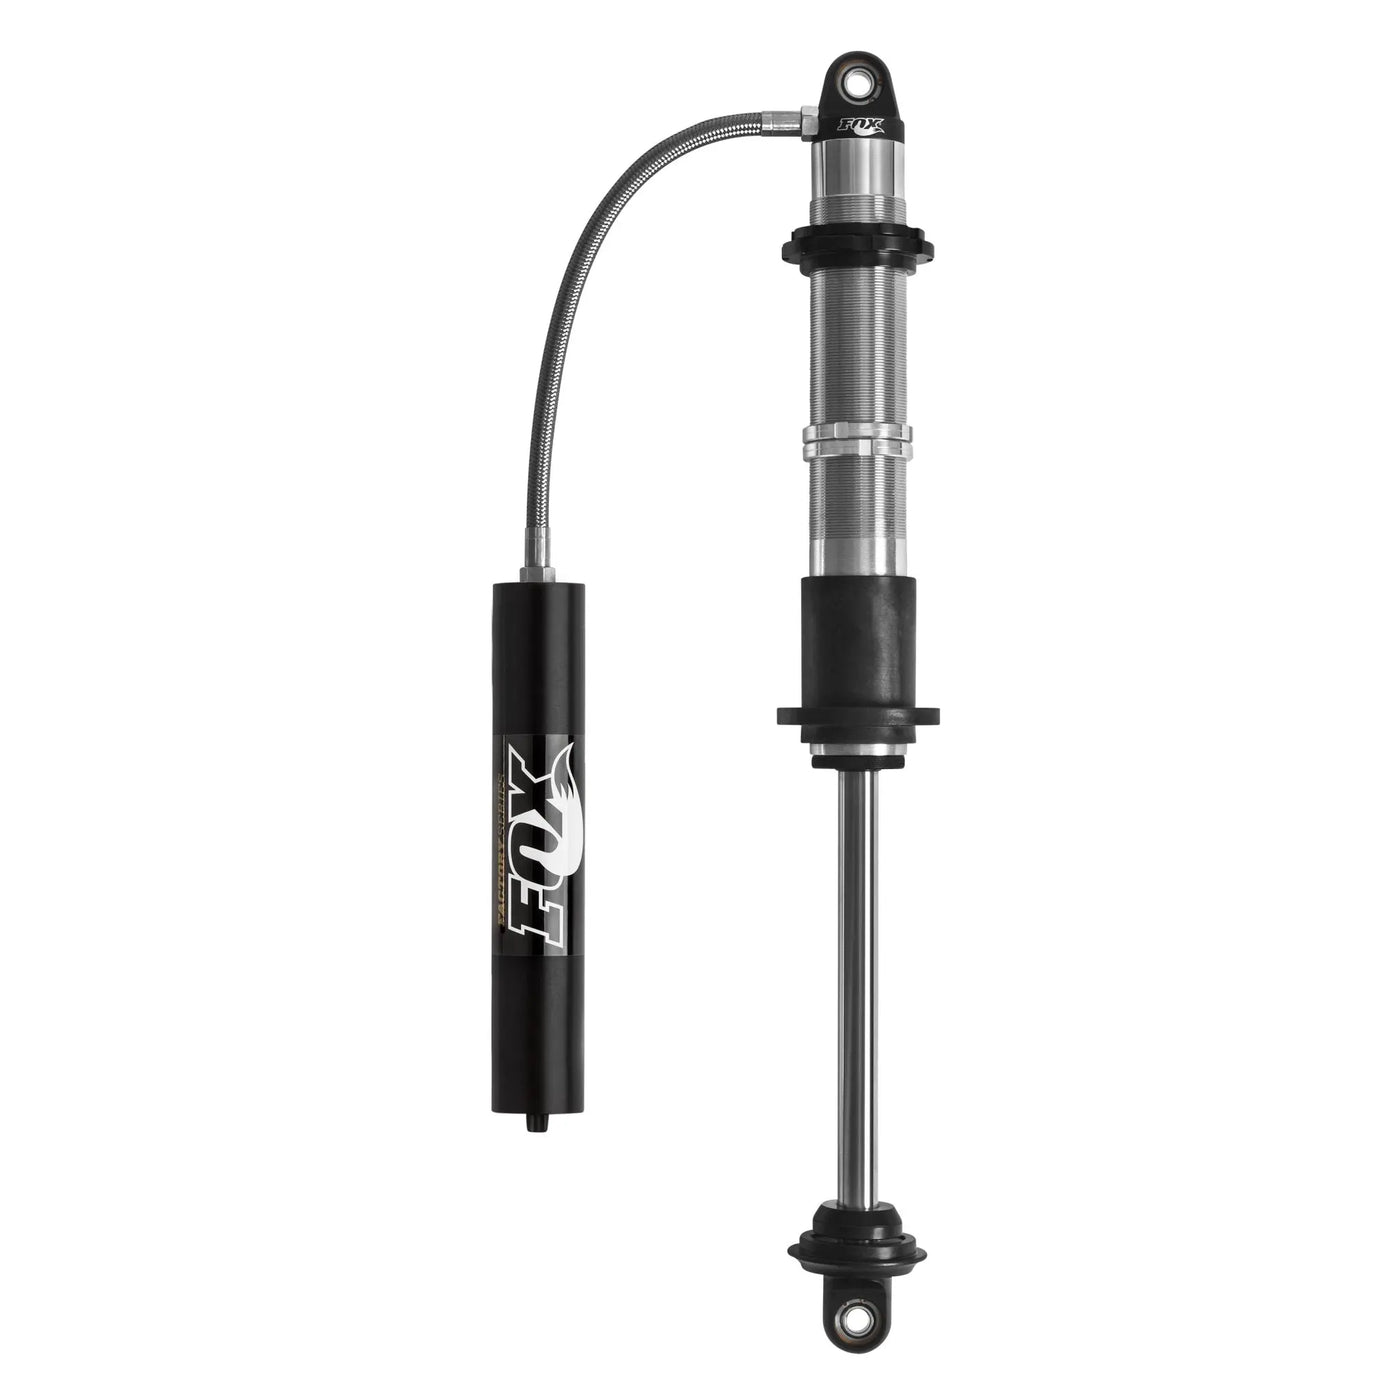 Fox 2.0 Factory Race Series Coil-Over Remote Reservoir Shock, 5/8" Shaft - Wheel Every Weekend